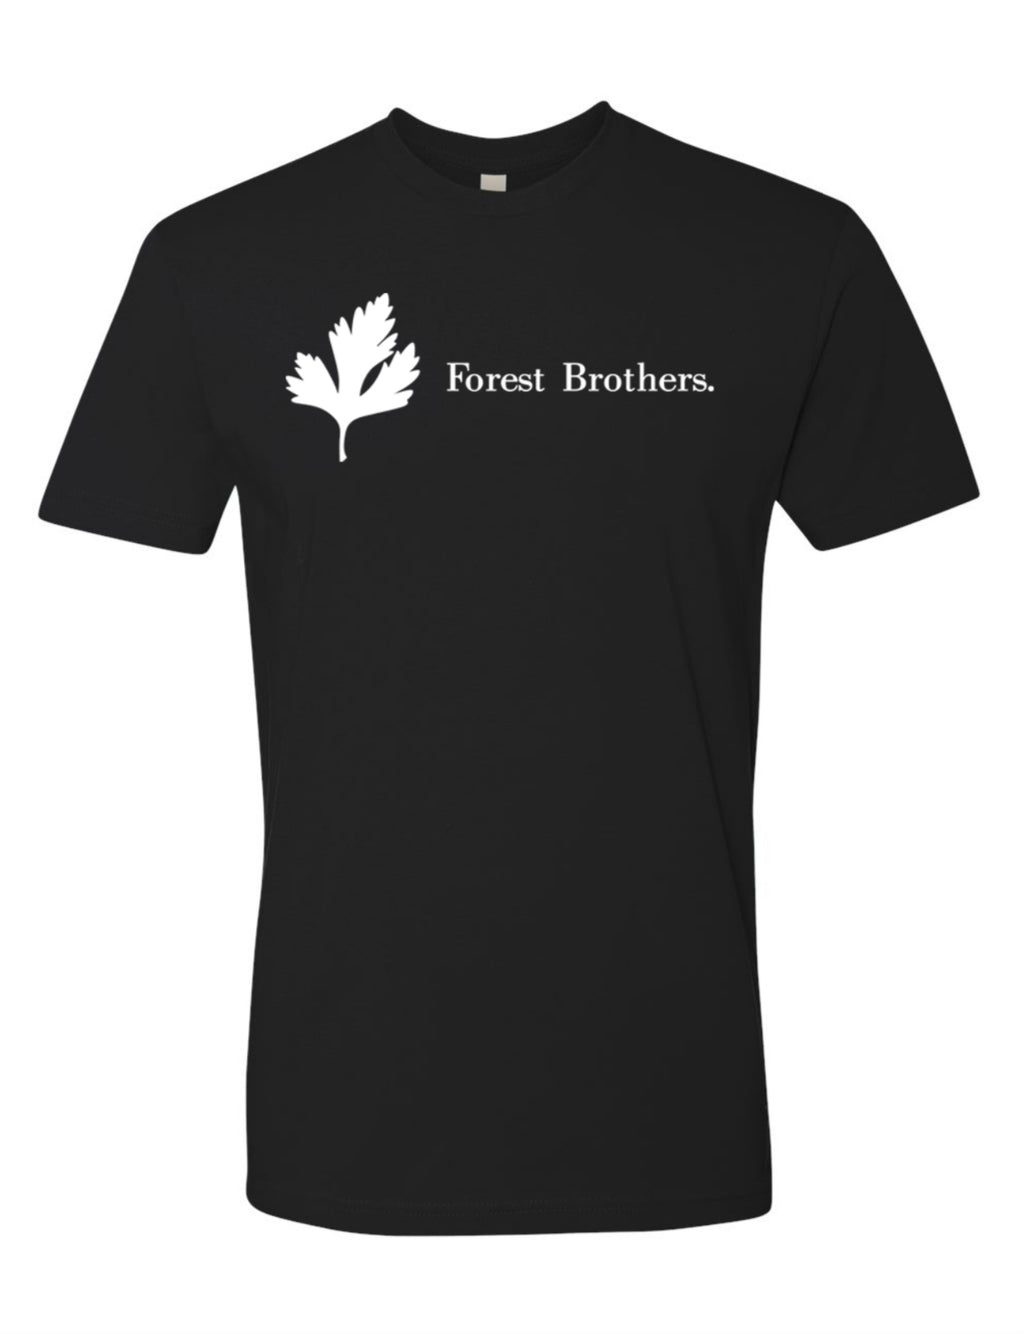 WHITE(BLACK) FOREST BROTHERS T-SHIRTS